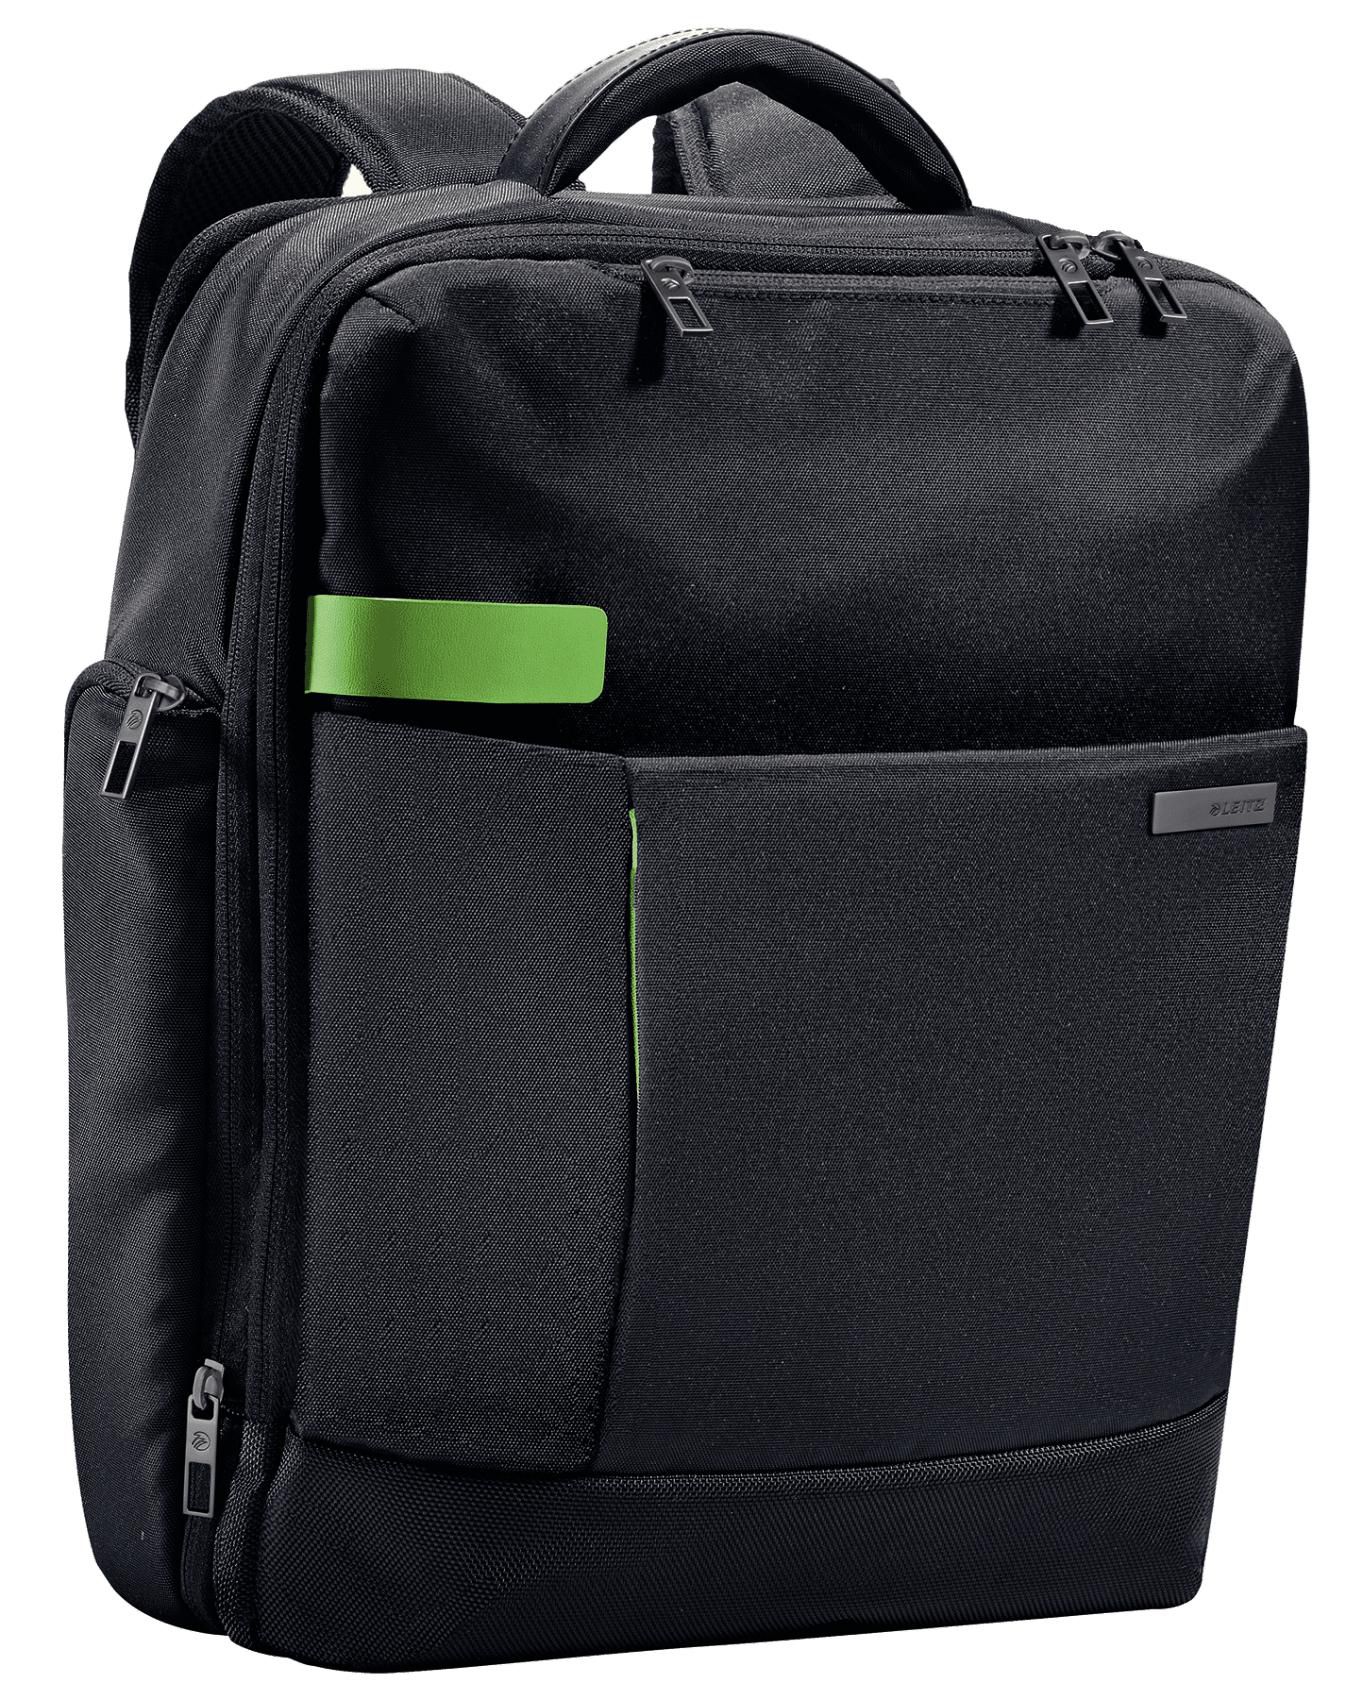 Backpack for Laptop 15.6"